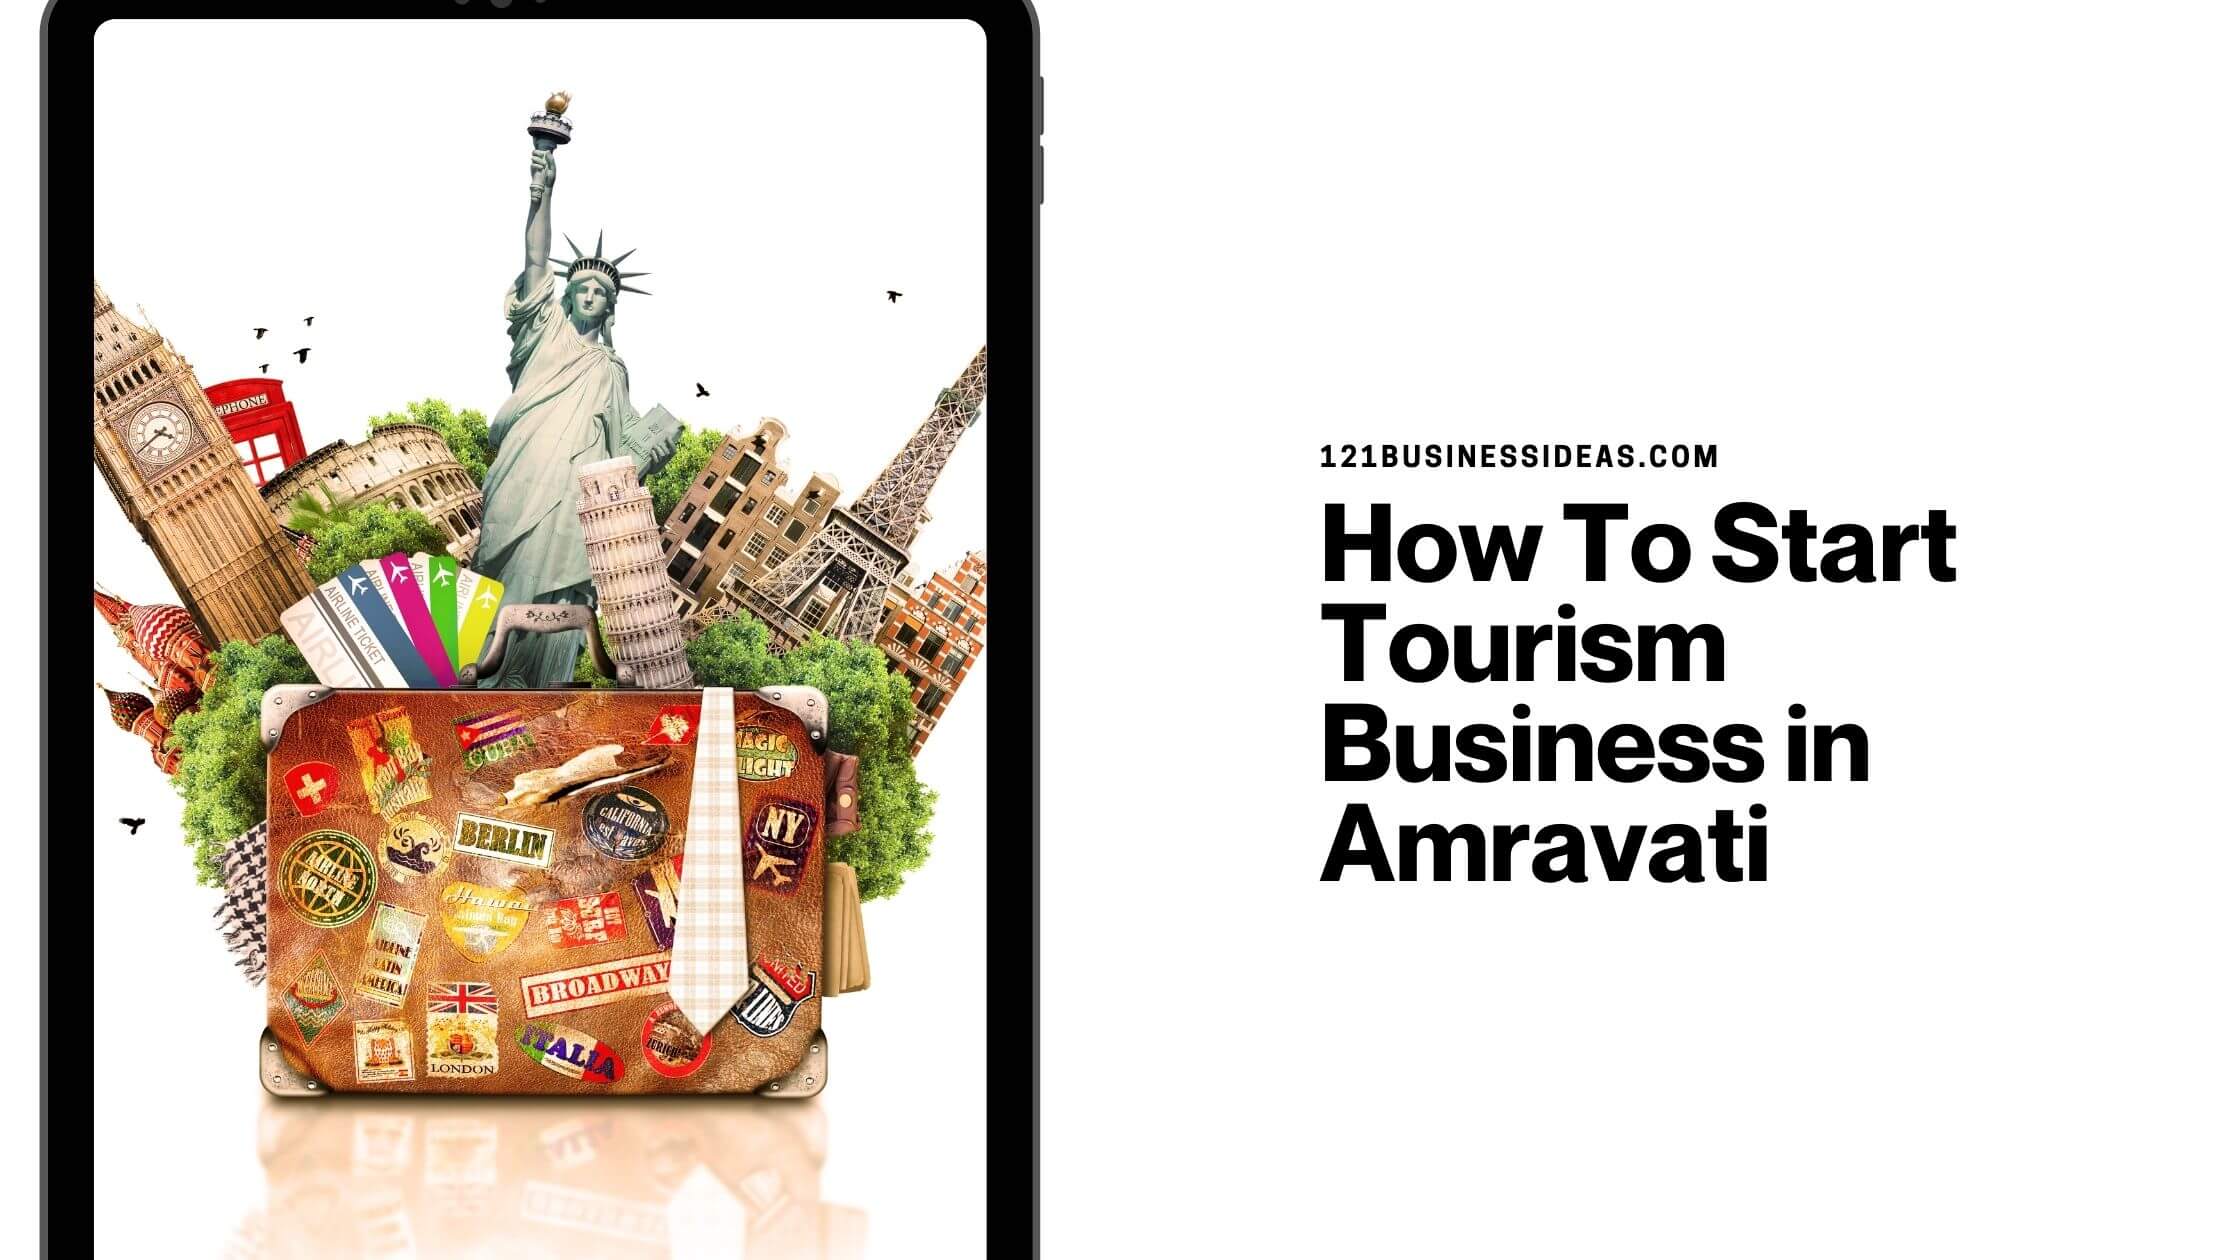 How To Start Tourism Business in Amravati (1)